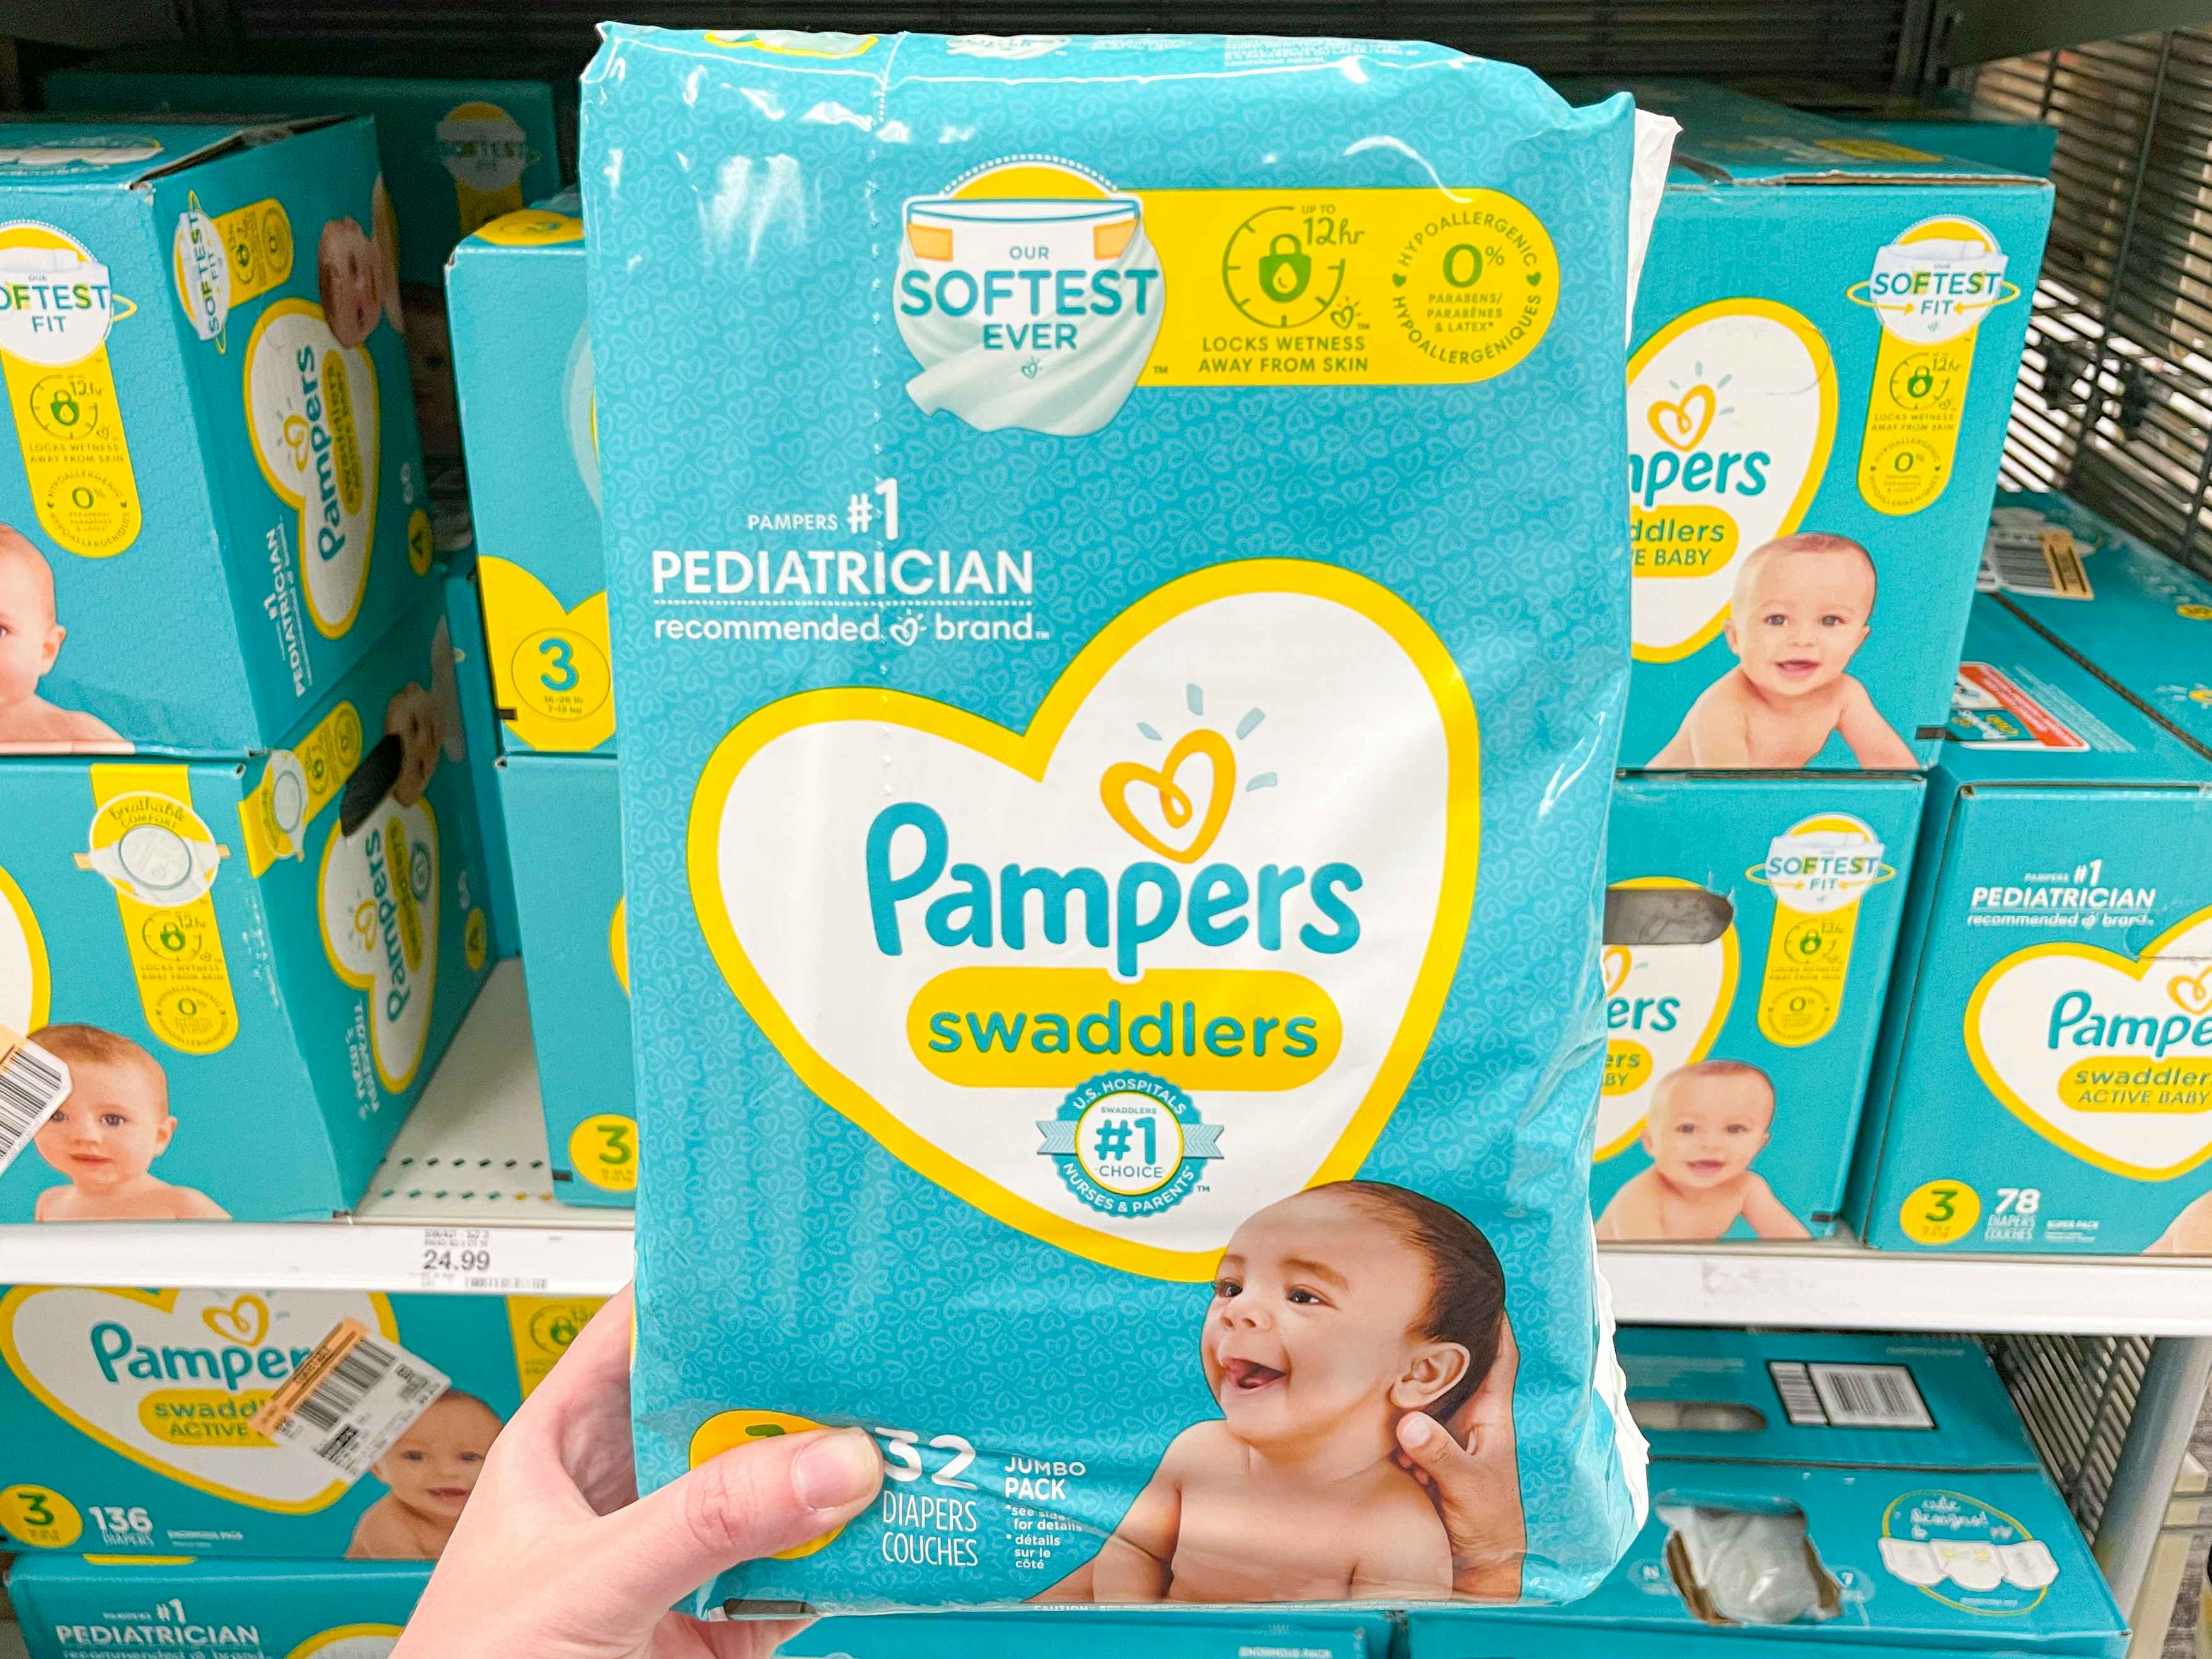 Papers baby diapers at Target.